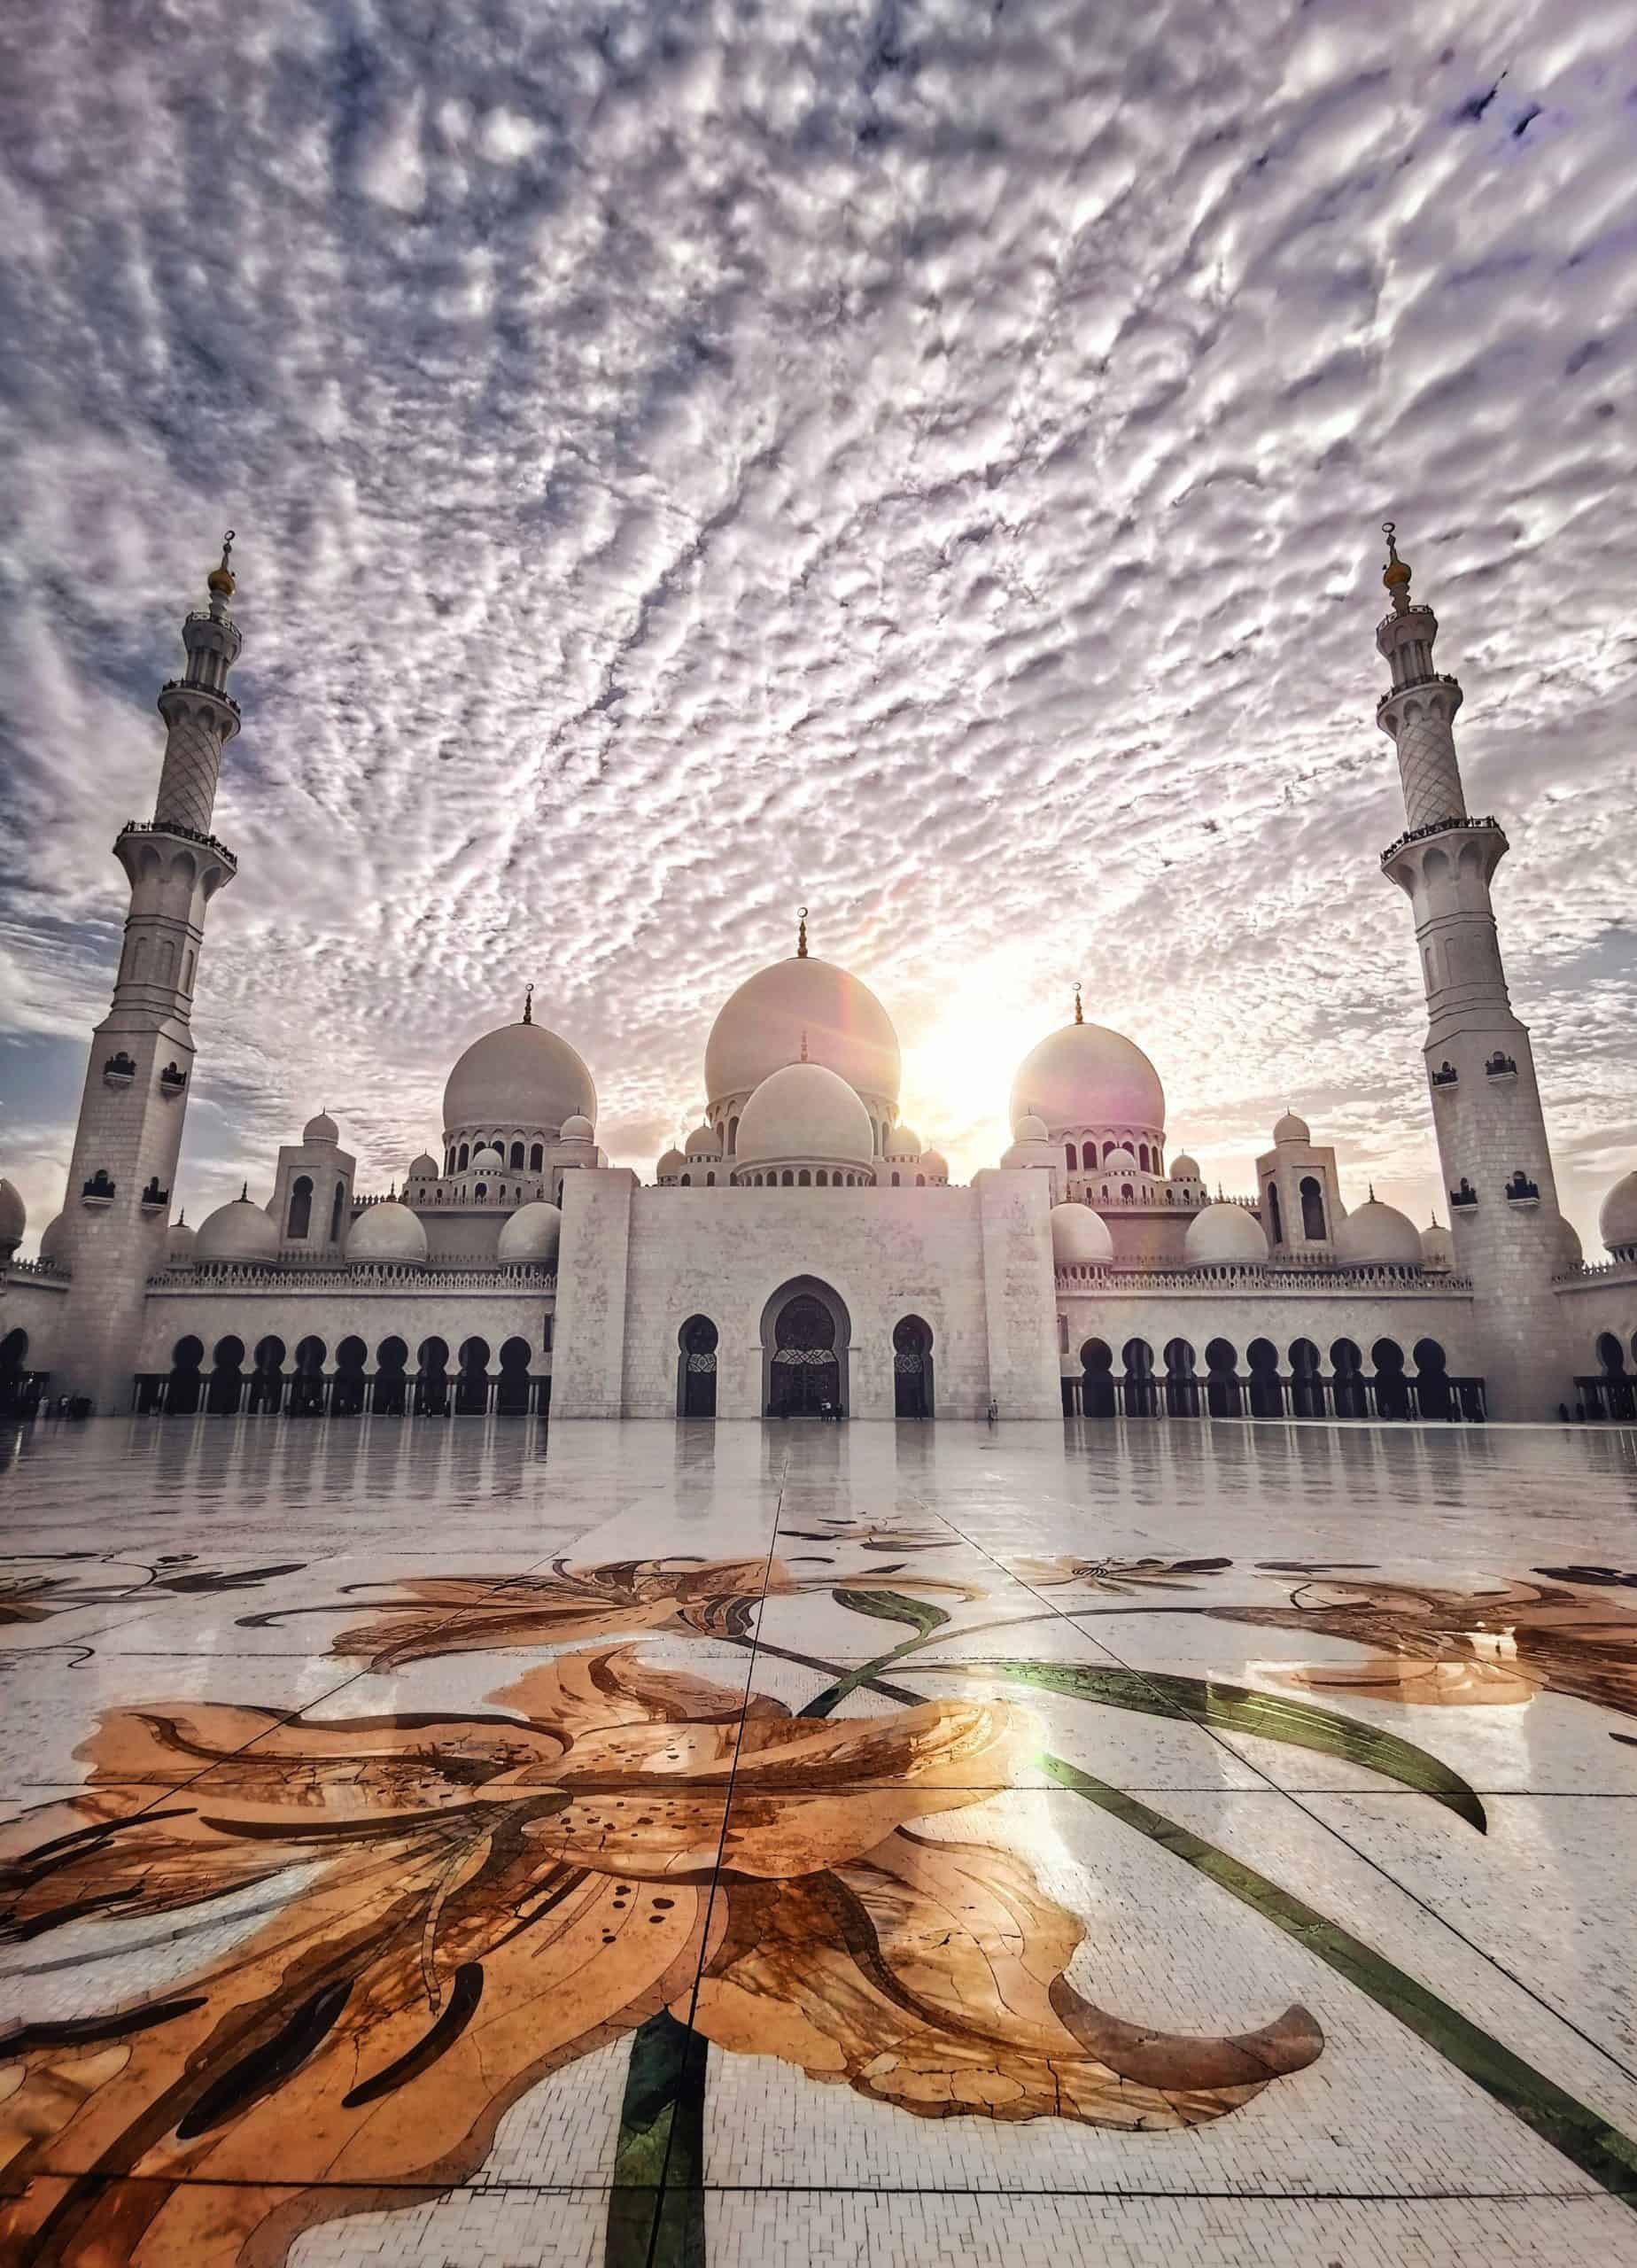 20 photos to inspire you to visit Abu Dhabi - Sheikh Zayed Grand Mosque with beautiful sky